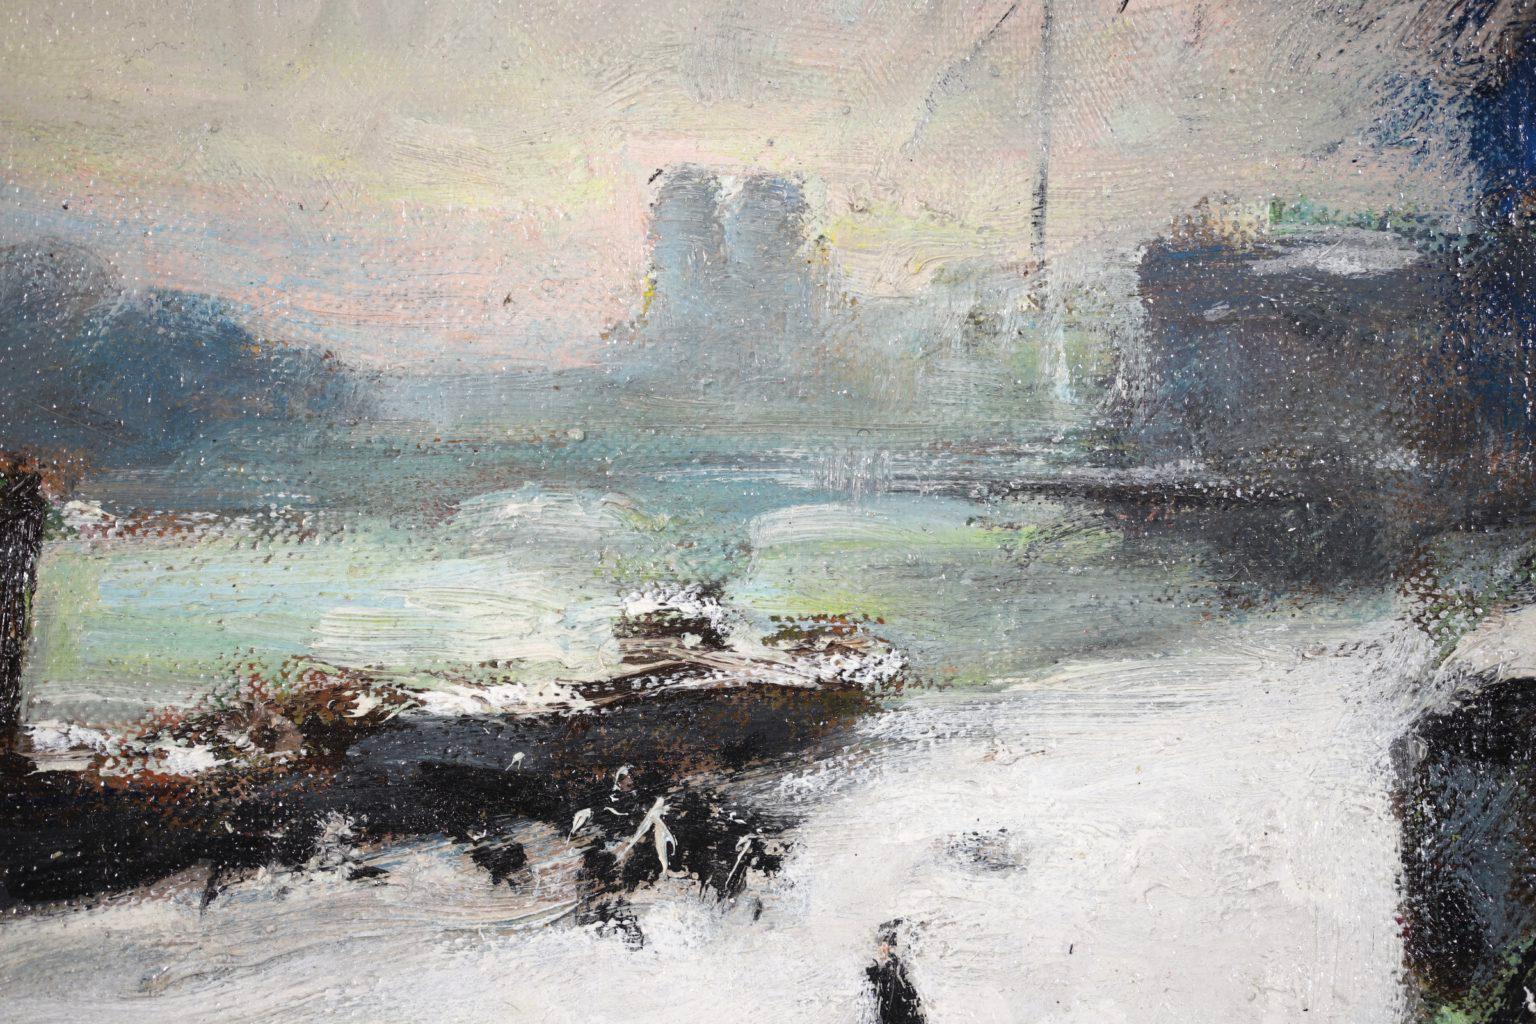 Seine in the Snow - Impressionist Oil, Figures in Riverscape by Jules Rene Herve 2